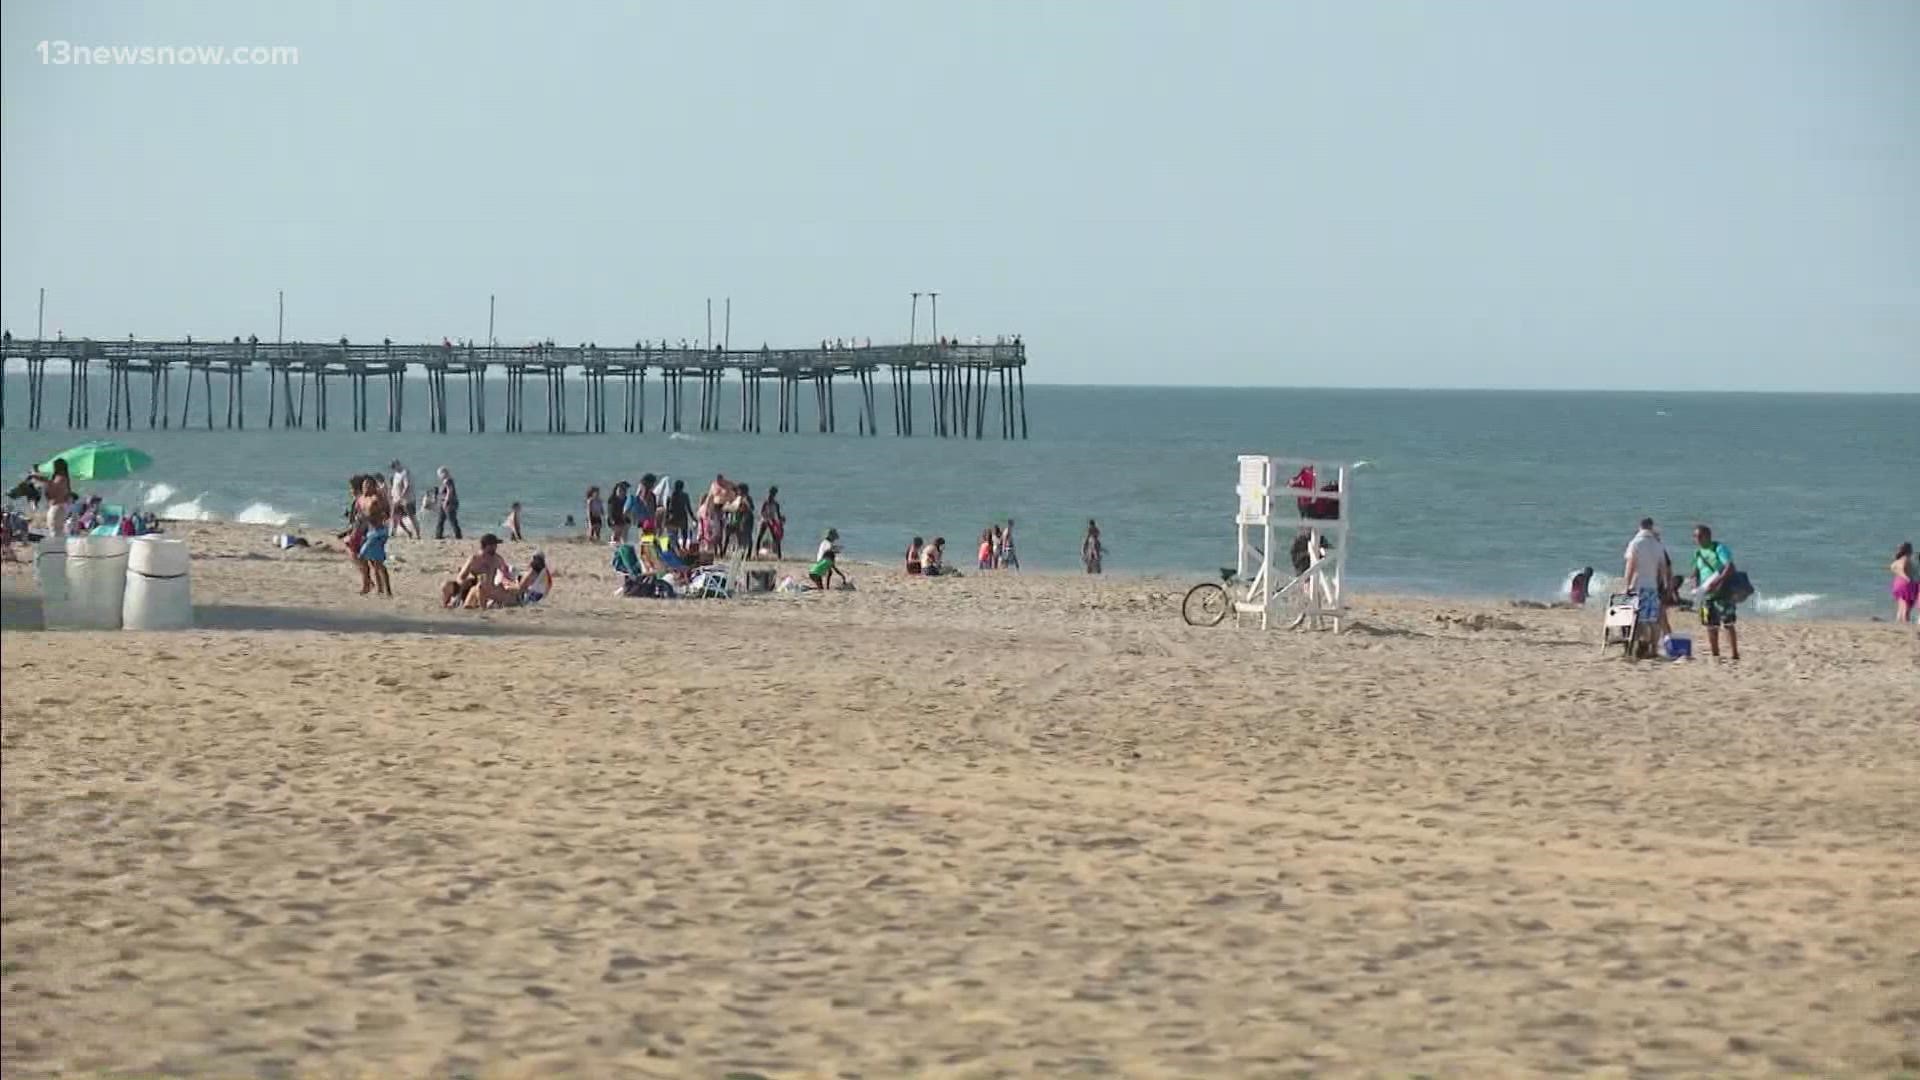 From the seashore to live music in restaurants, many people took to Virginia Beach for Memorial Day Weekend.